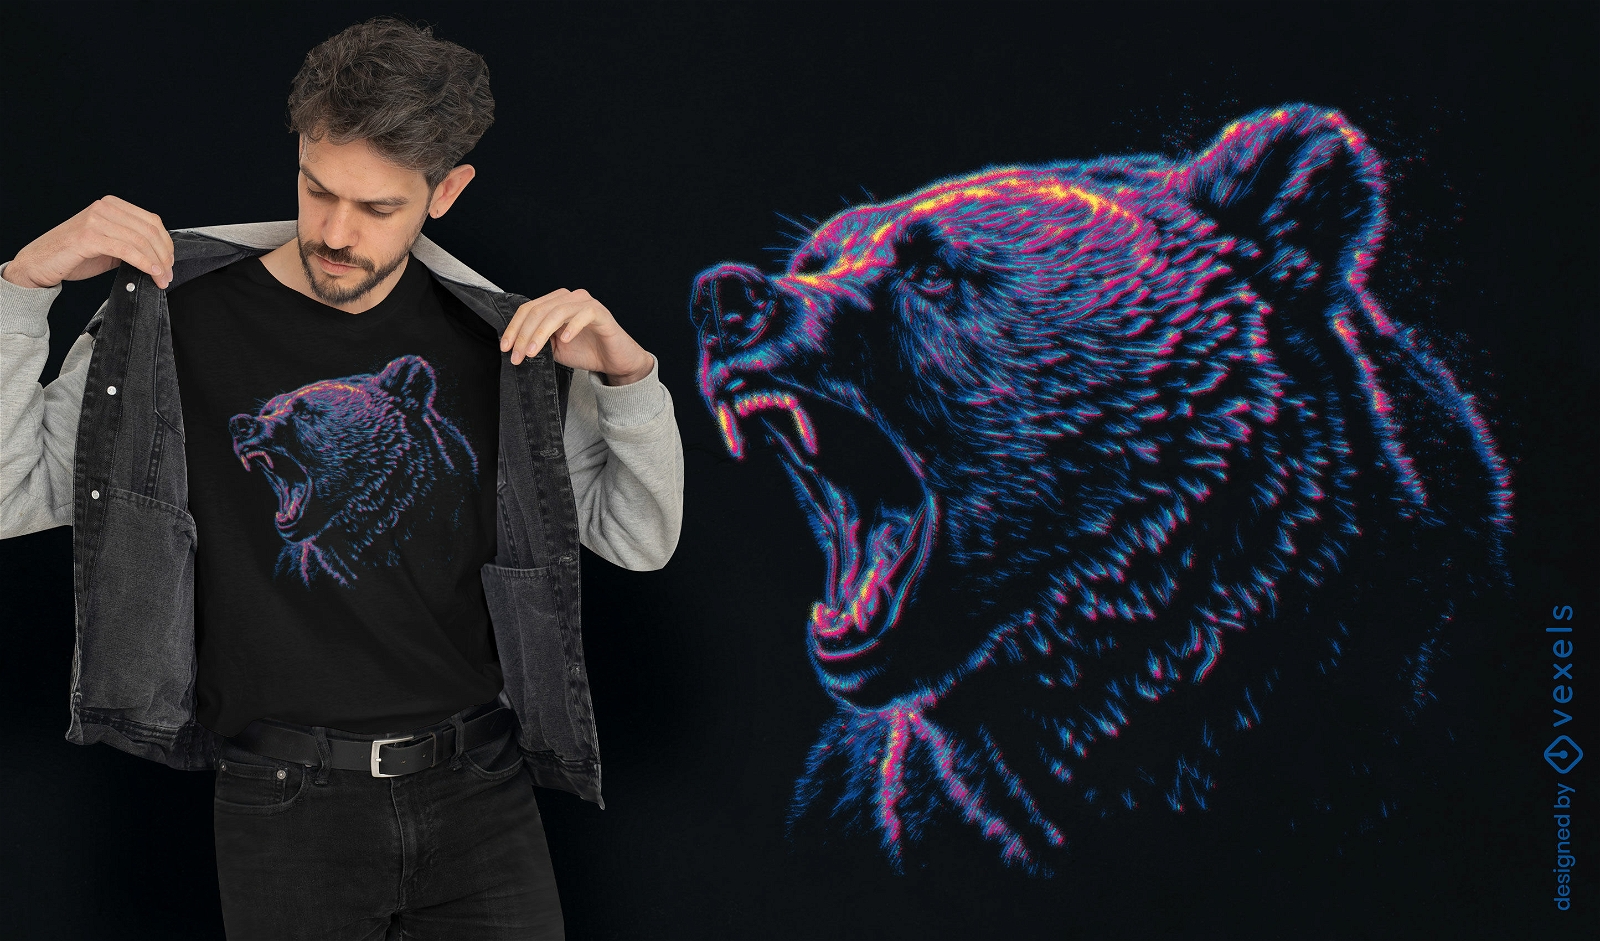 Roaring grizzly bear t-shirt design